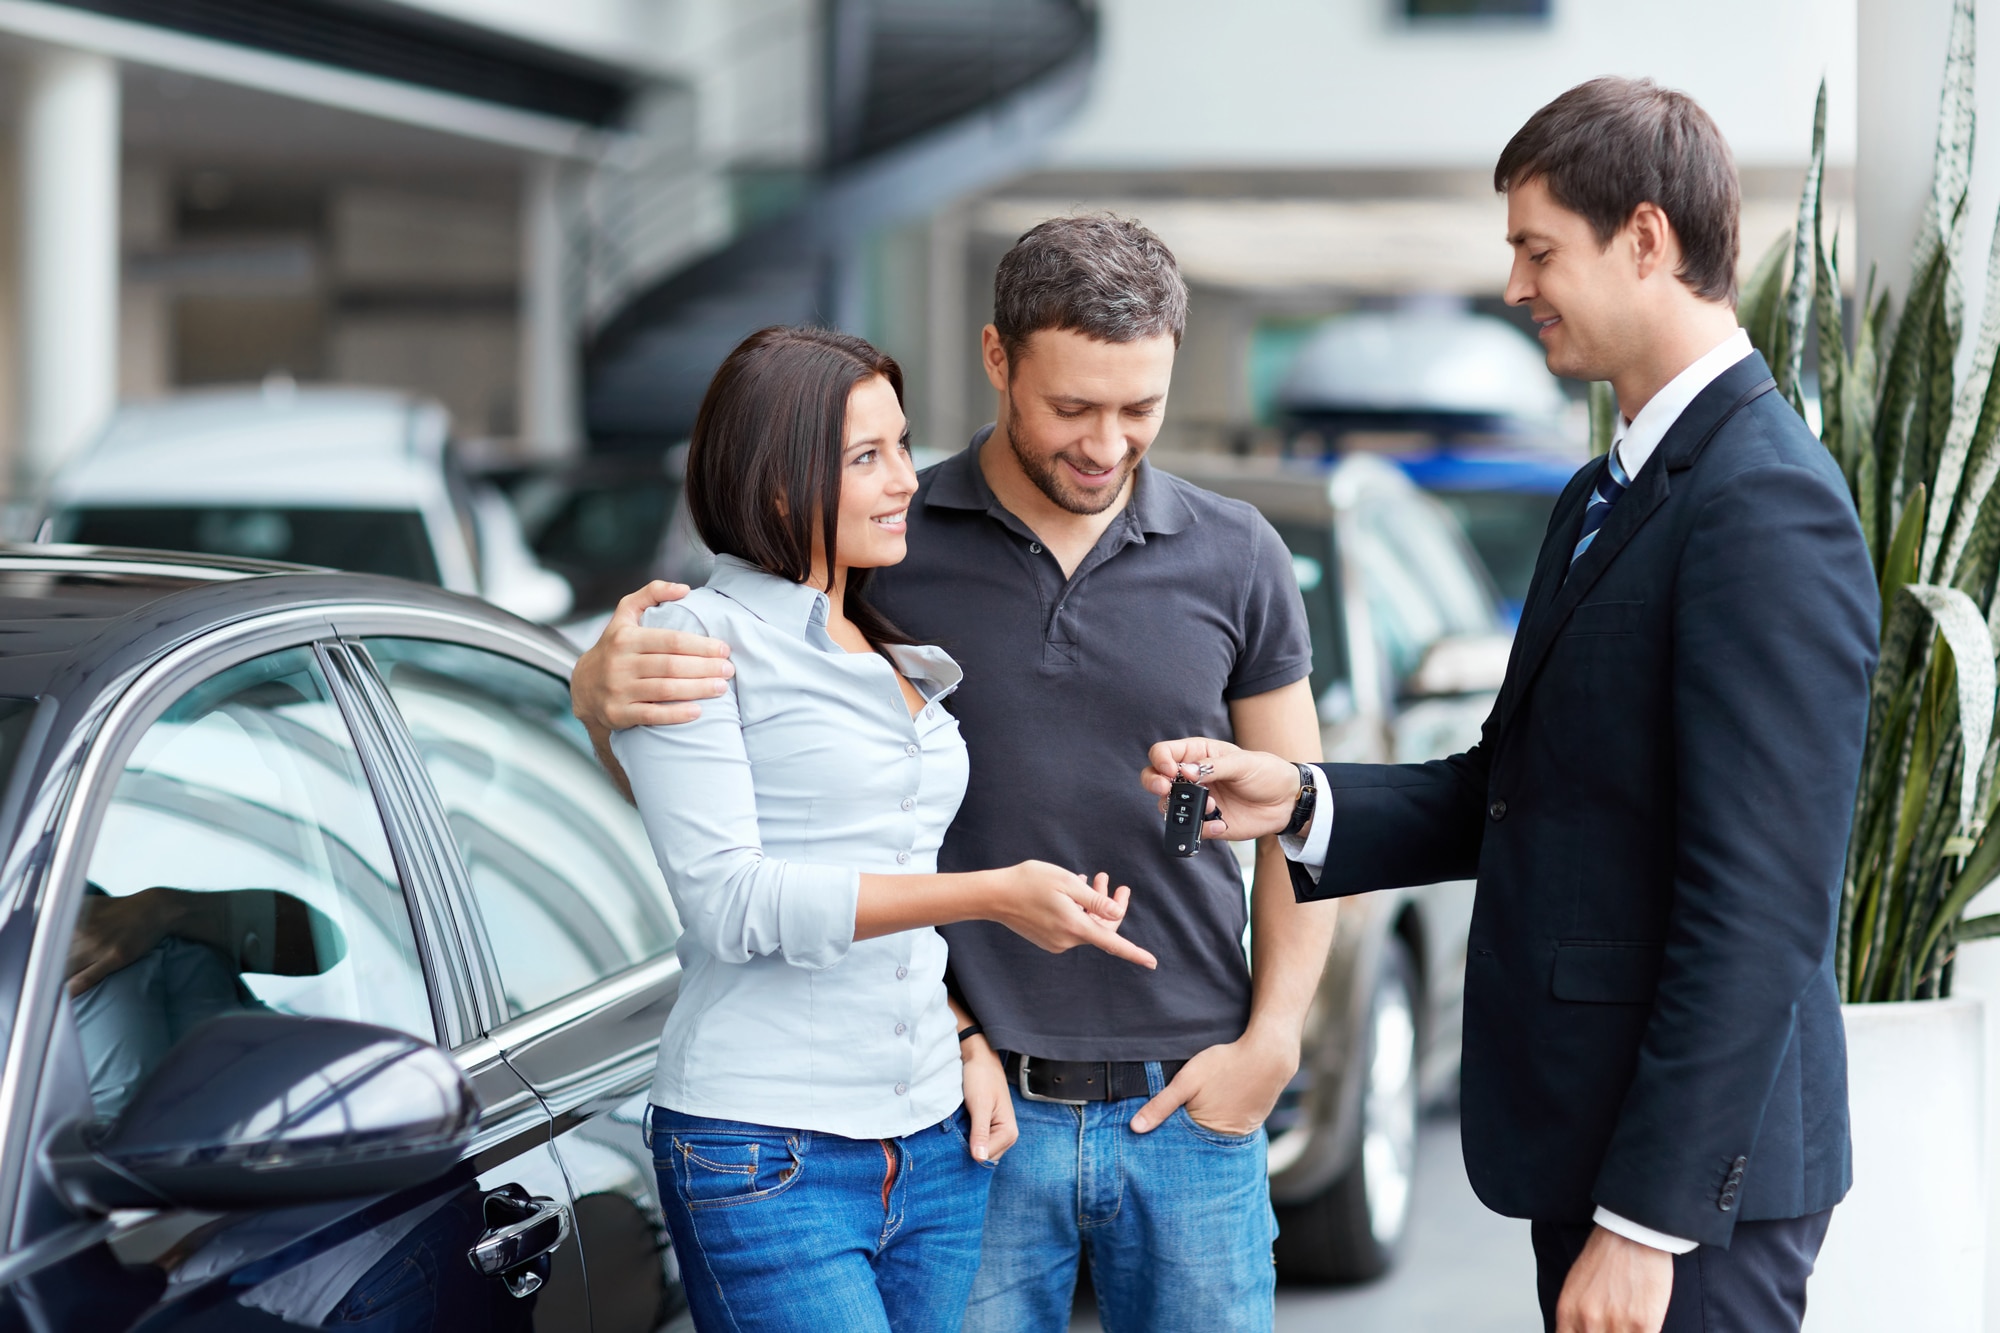 Young couple buys car and a representative hands the keys over to them